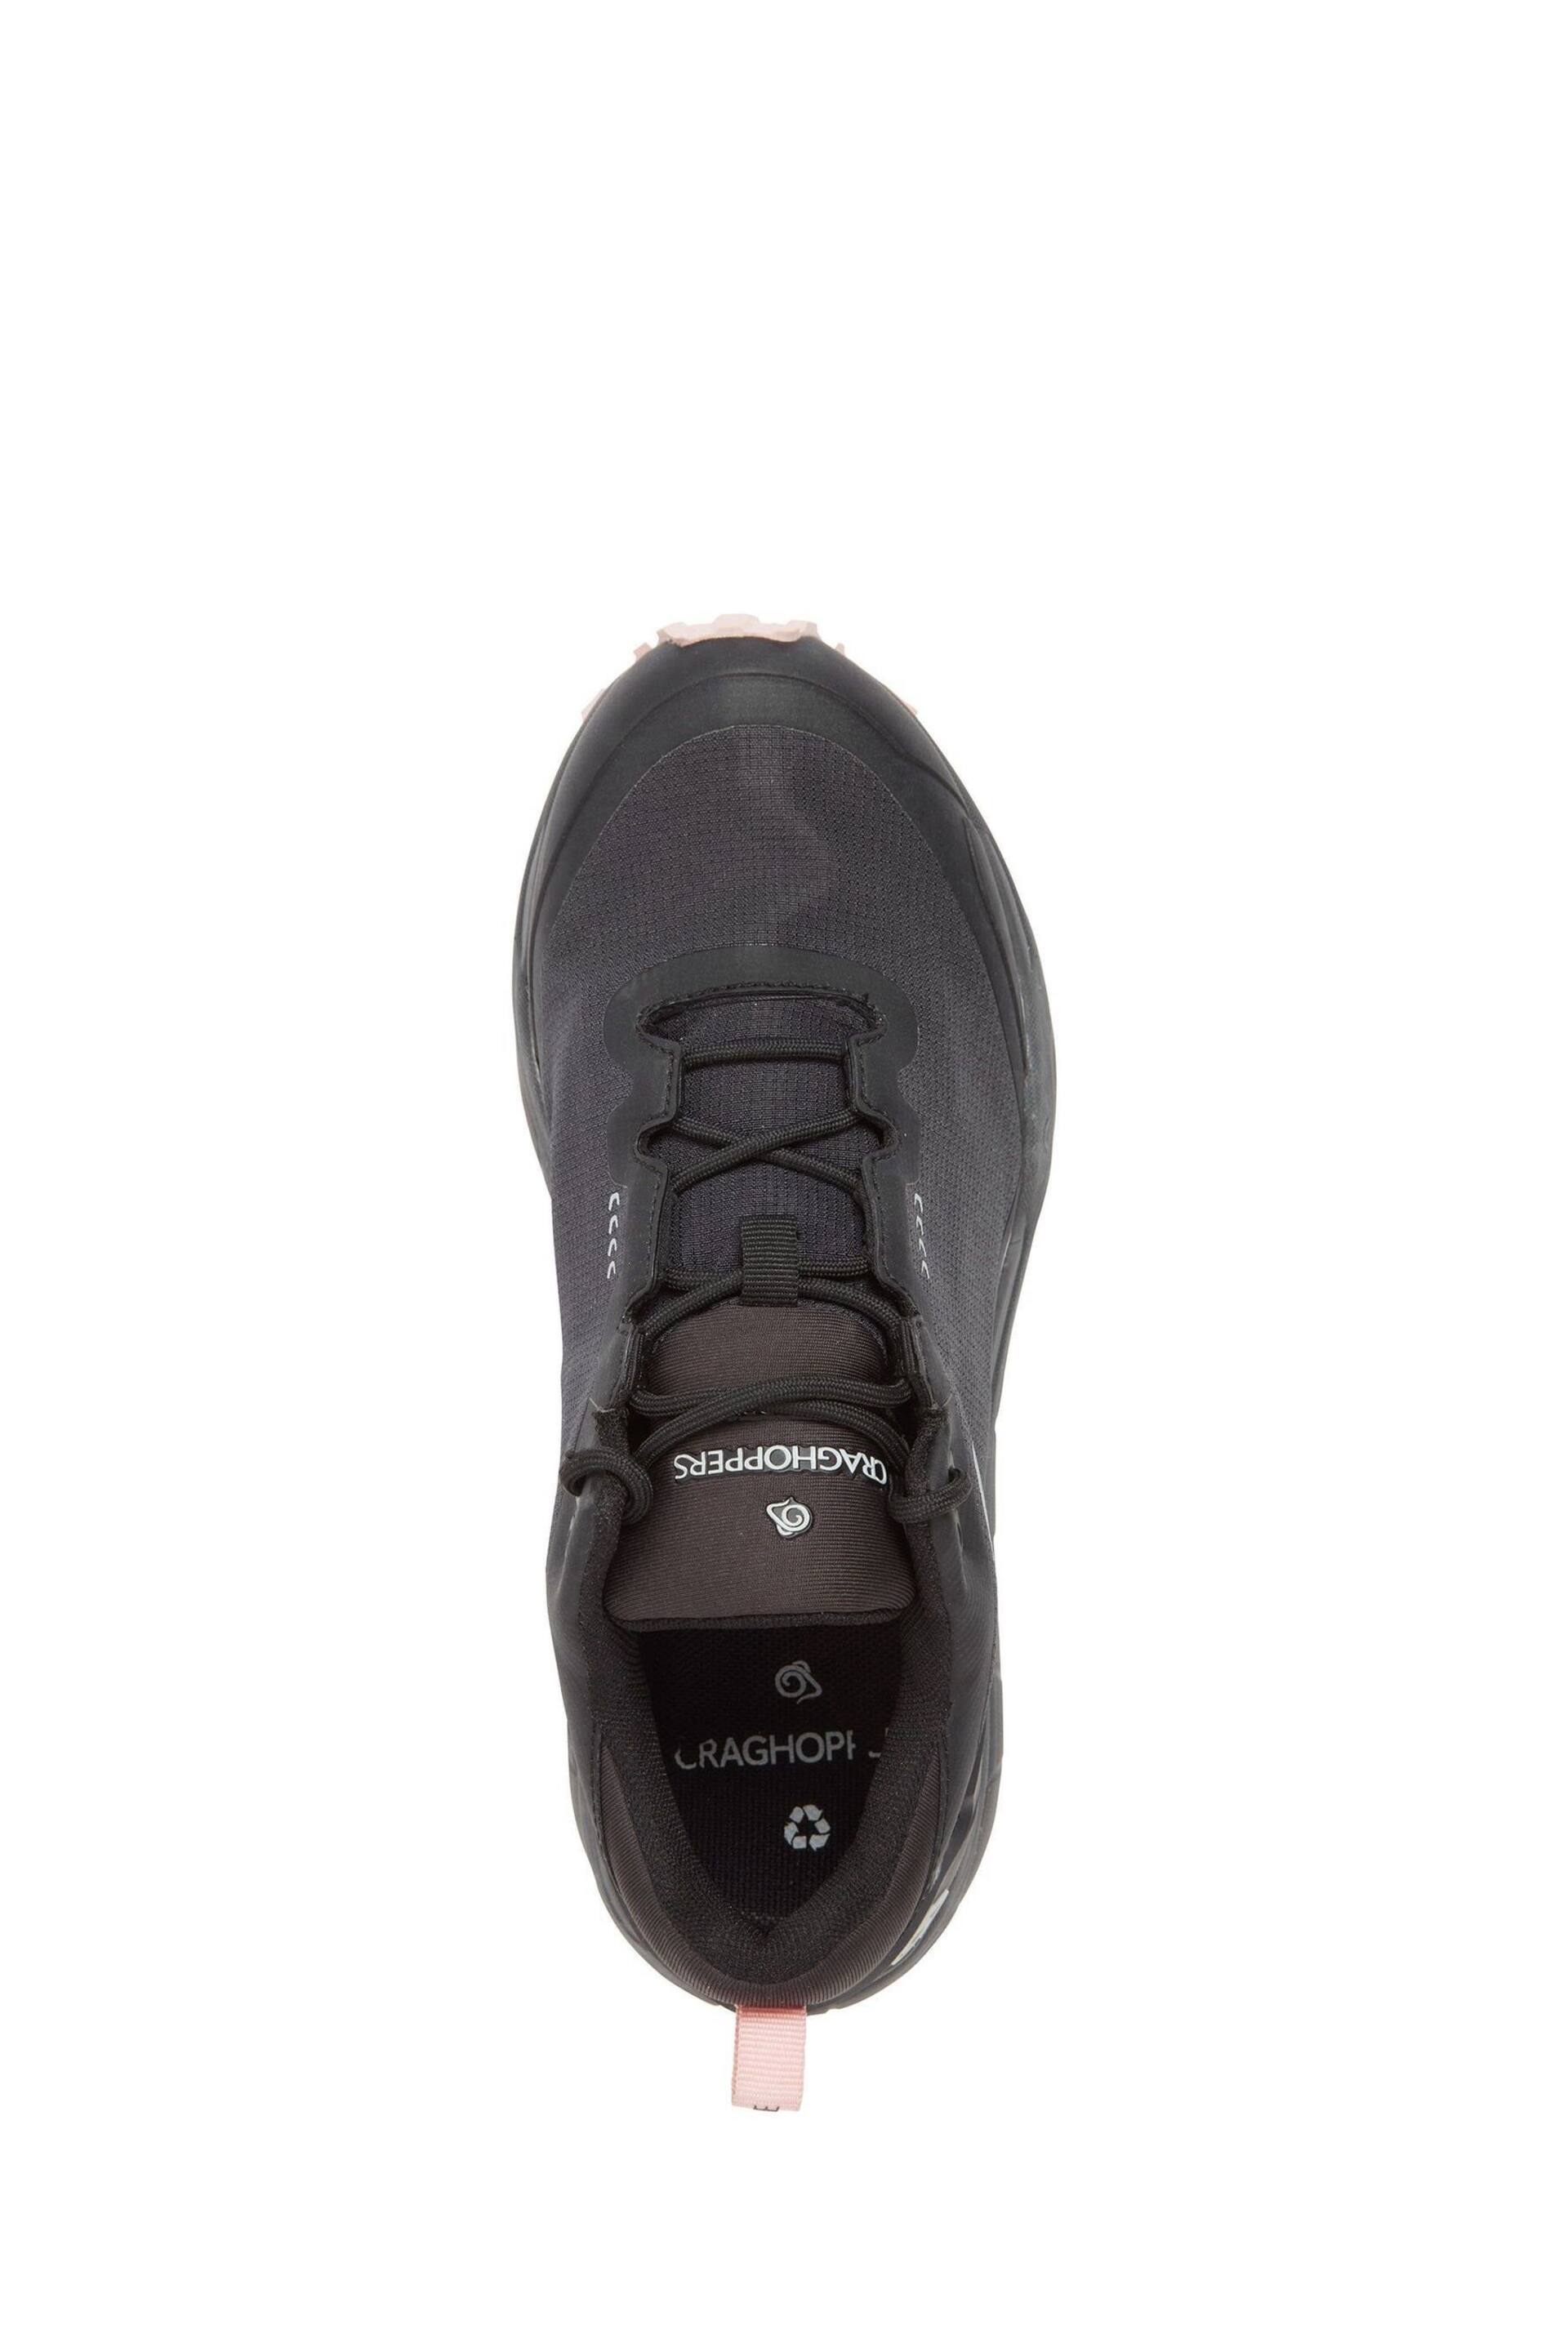 Craghoppers Adflex Low Black Shoes - Image 4 of 4